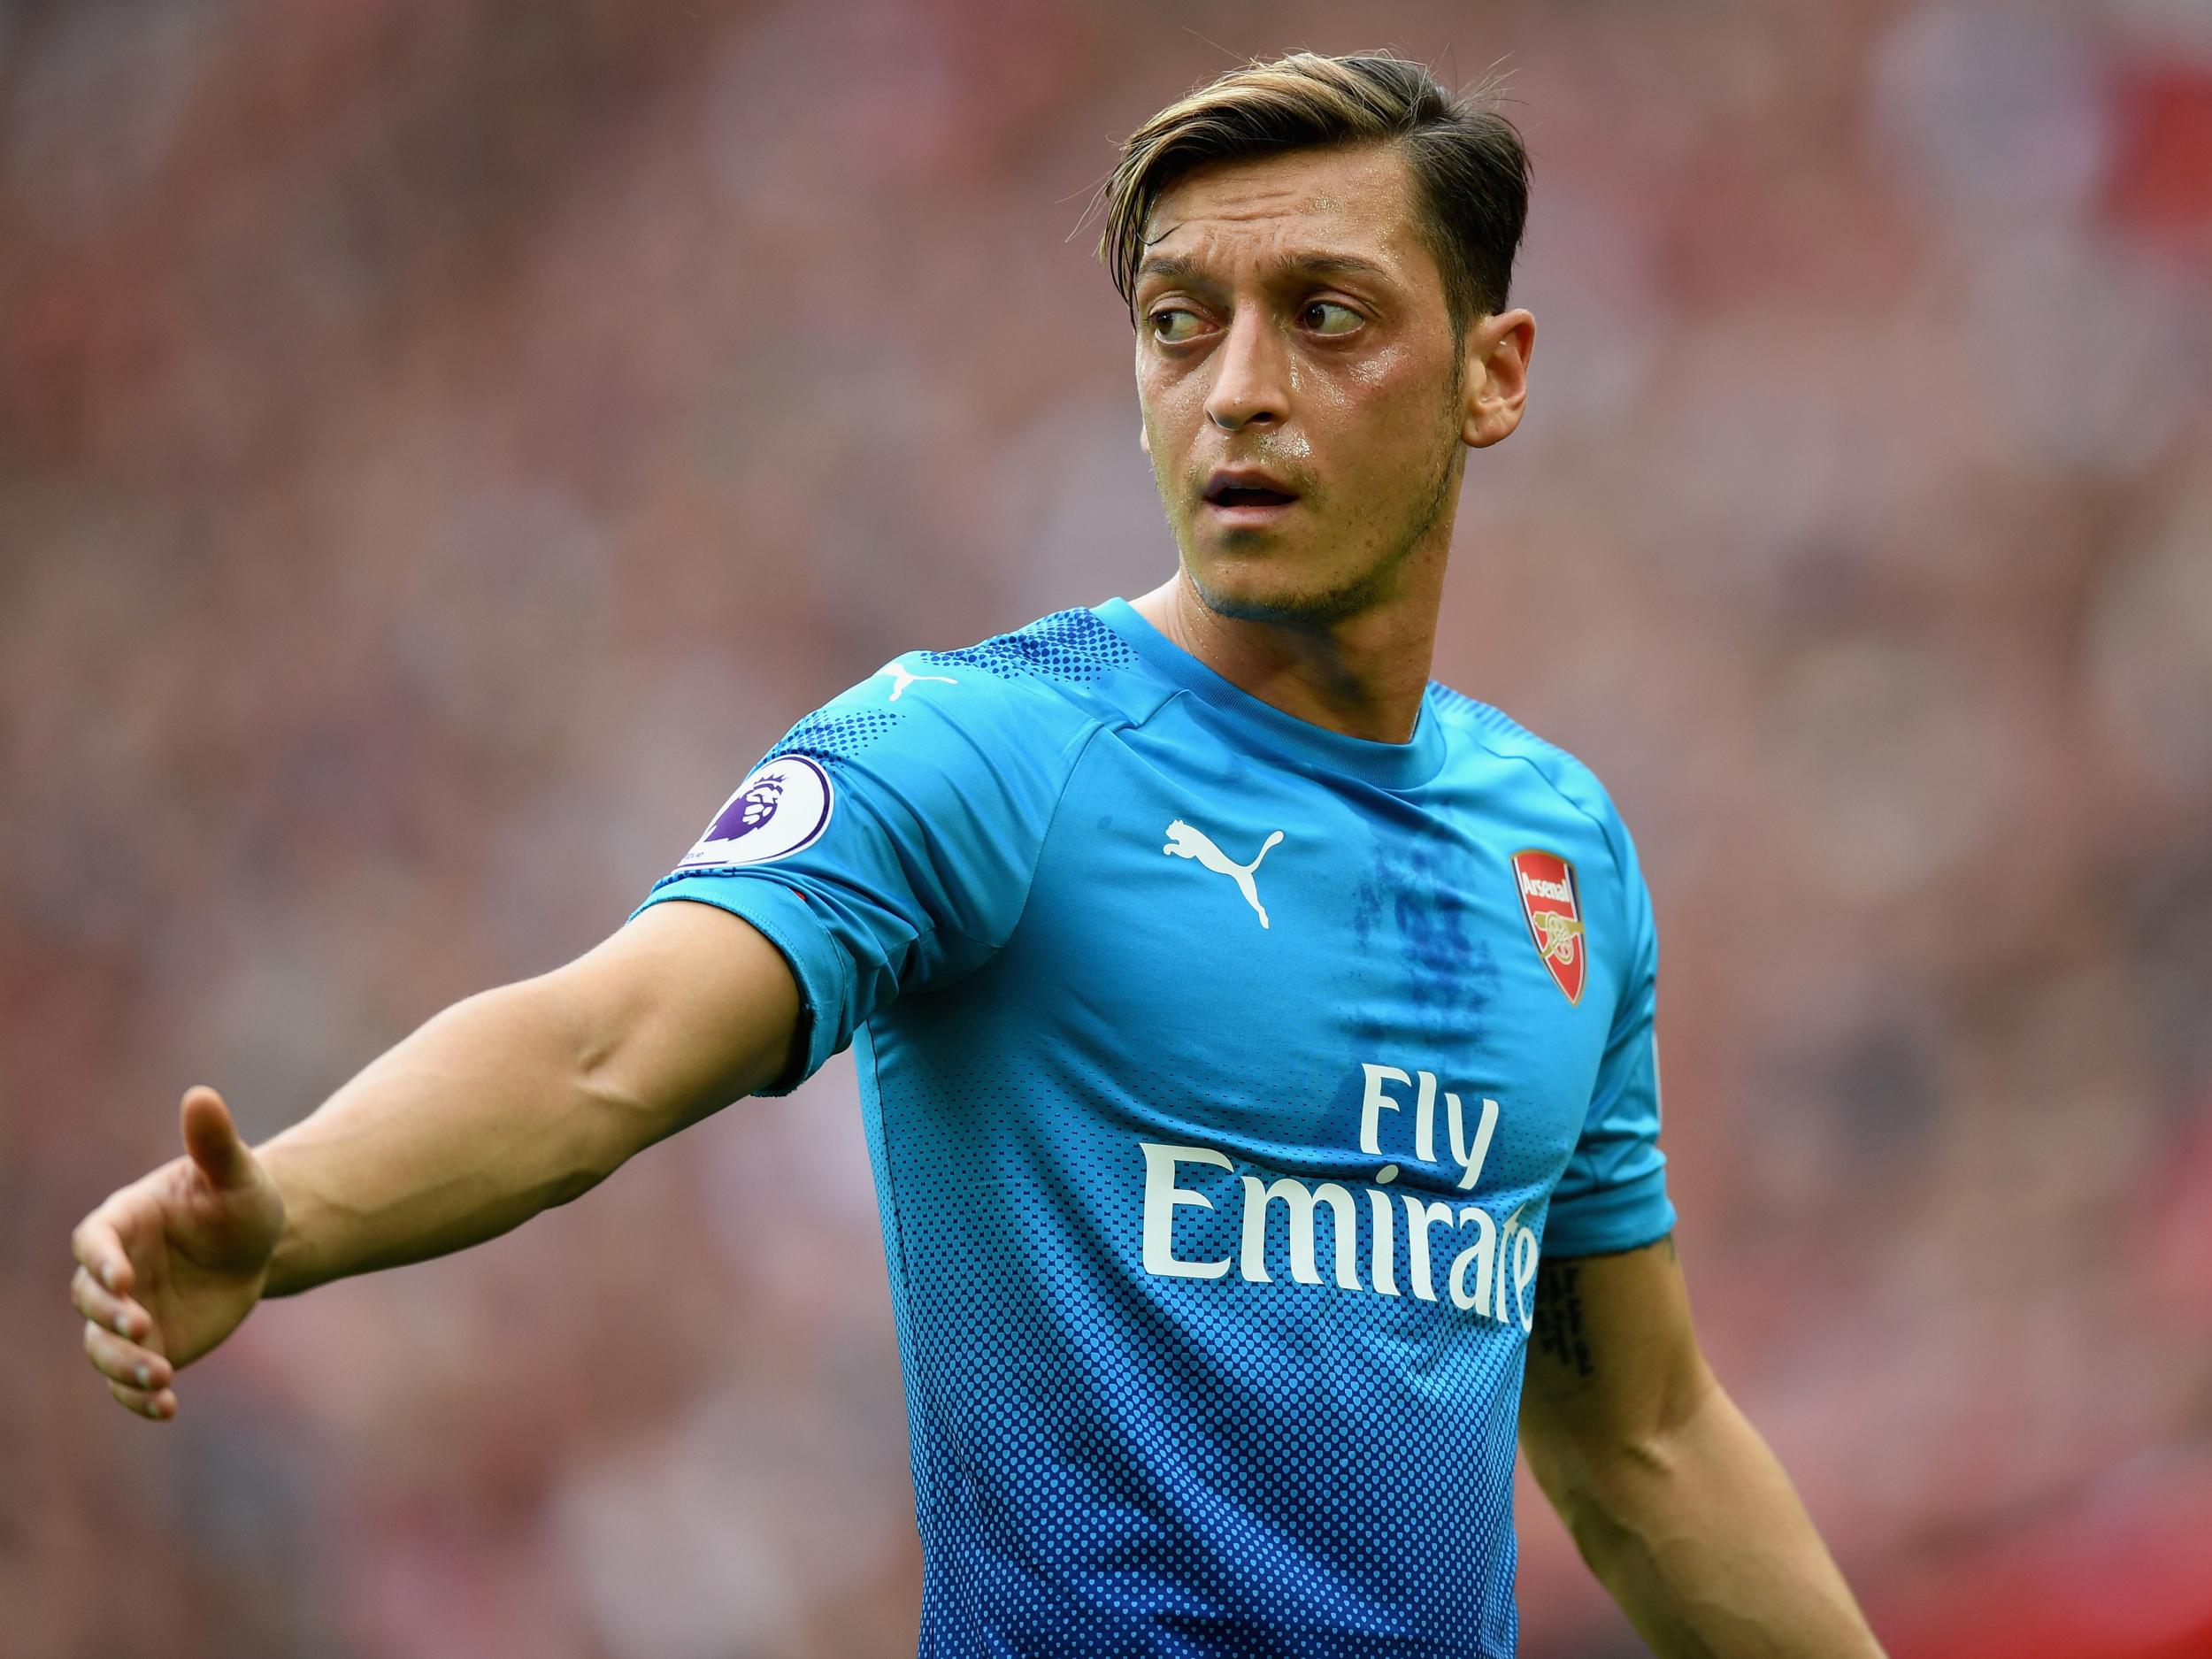 Mesut Ozil feels he has been victimised since moving to the Emirates four years ago